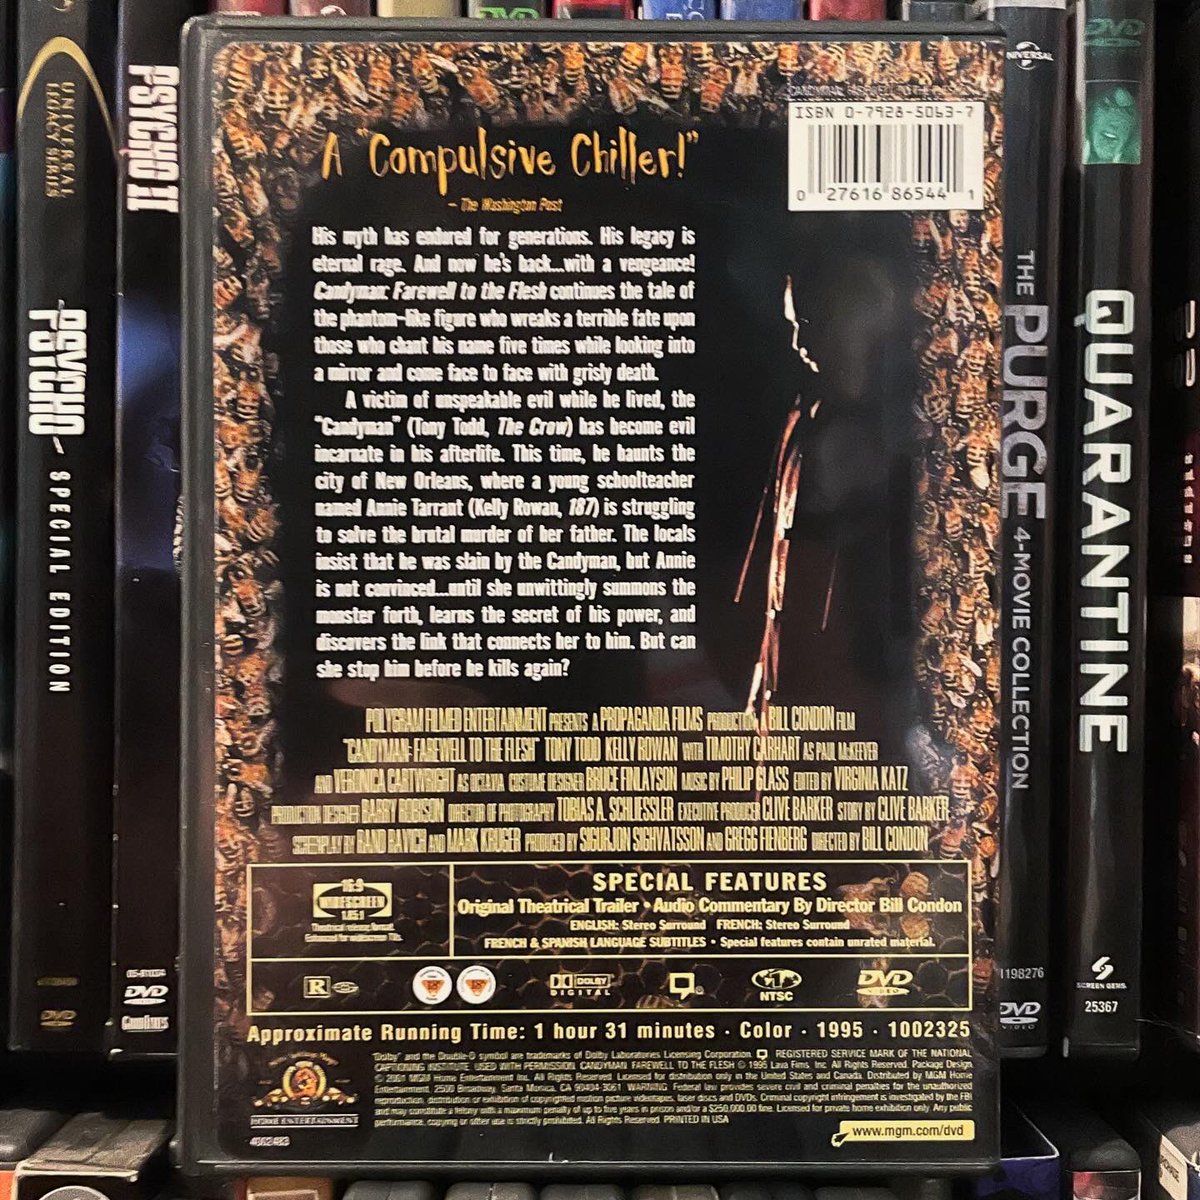 “Swallow your horror and let it nourish you. Come with me and sing the song of misery. Share my world!” #candyman #candyman2farewelltotheflesh #farewelltotheflesh #candymancandymancandyman #1995movie #90shorror #billcondon #tonytodd #kellyrowan #carolinebarclay #philipglass #dvd